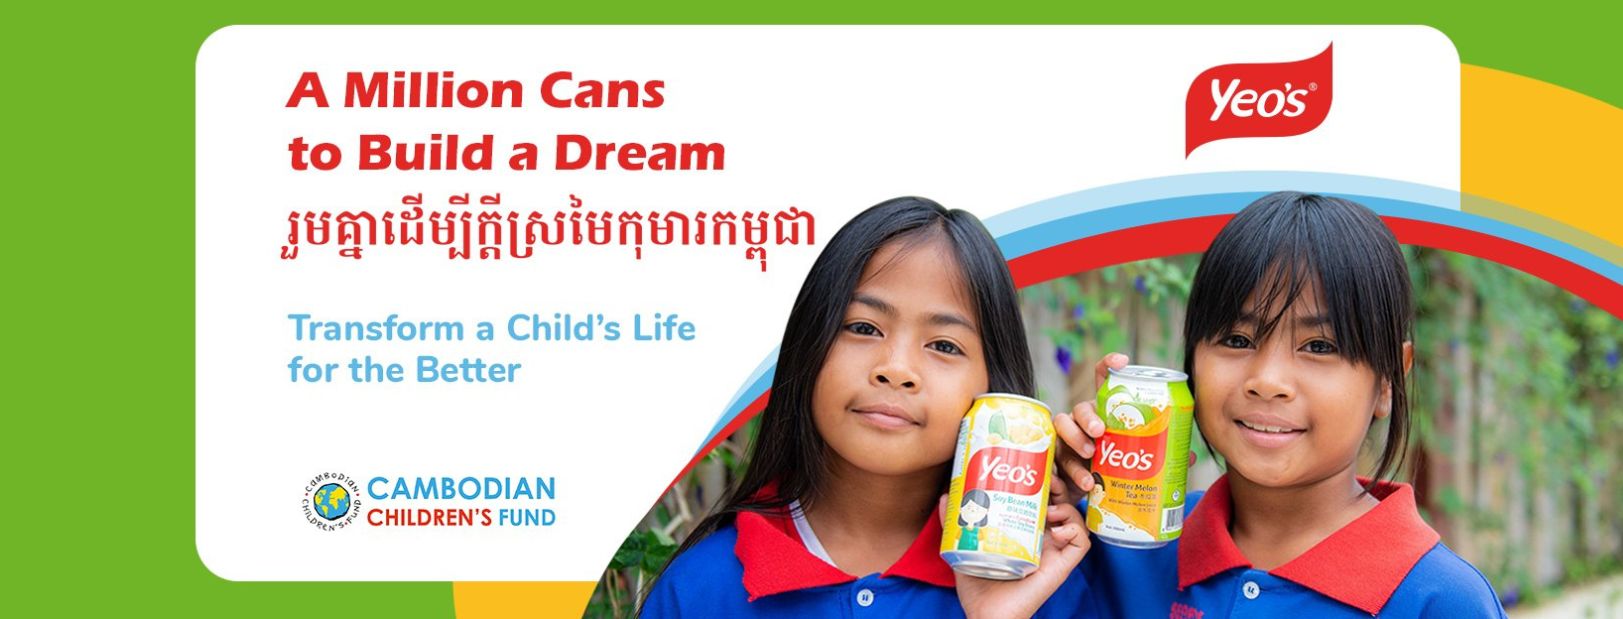 A Million Cans to Build a Dream by ERA Cambodia